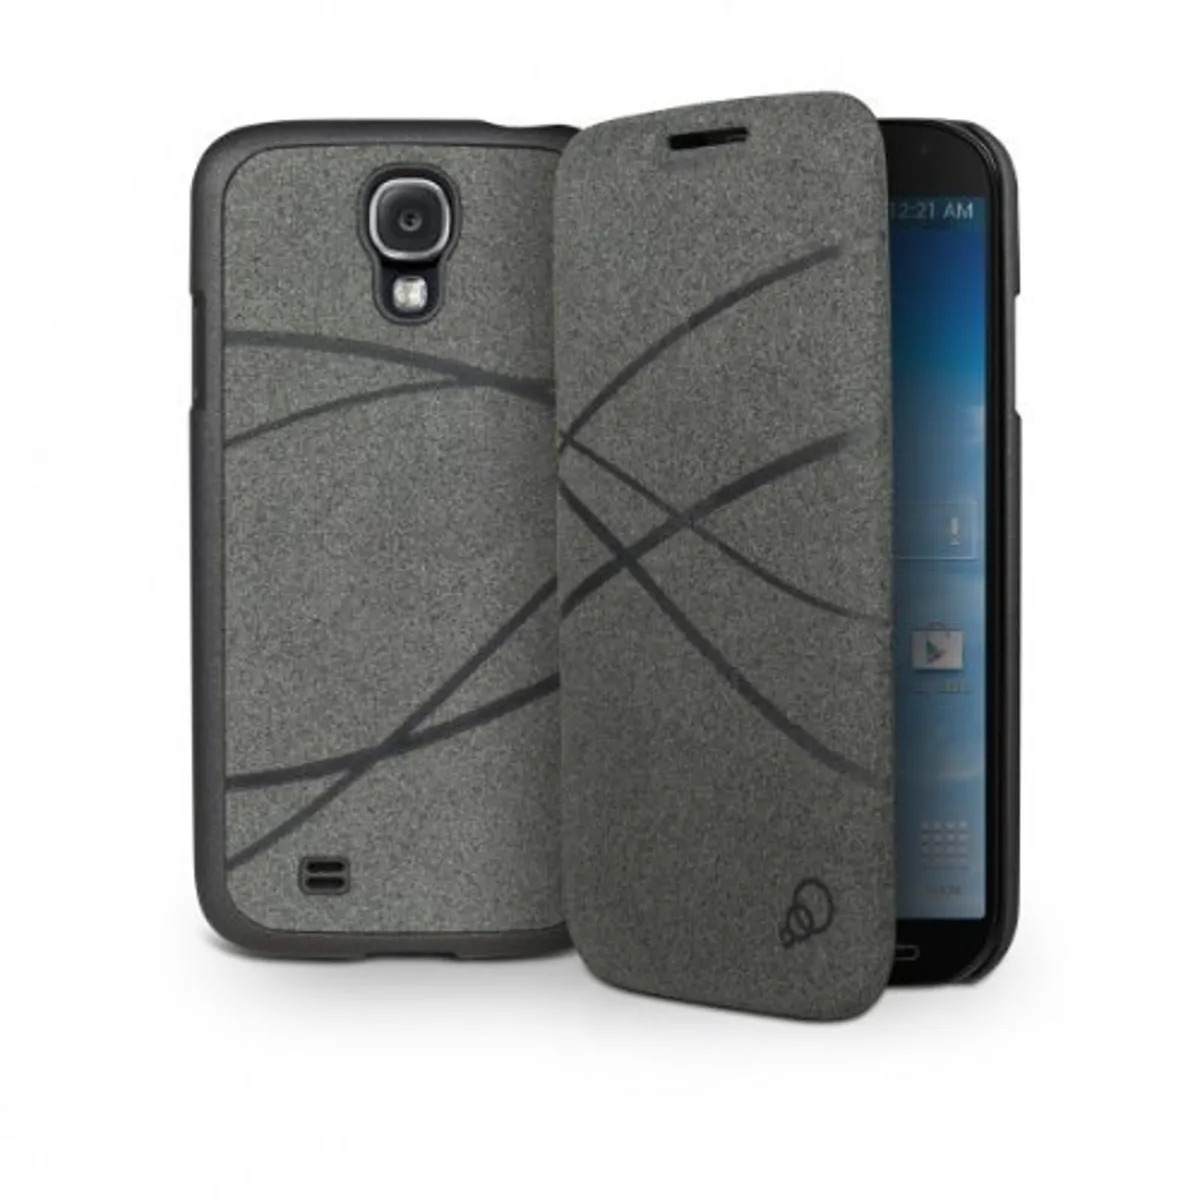 15-best-galaxy-s4-active-cases